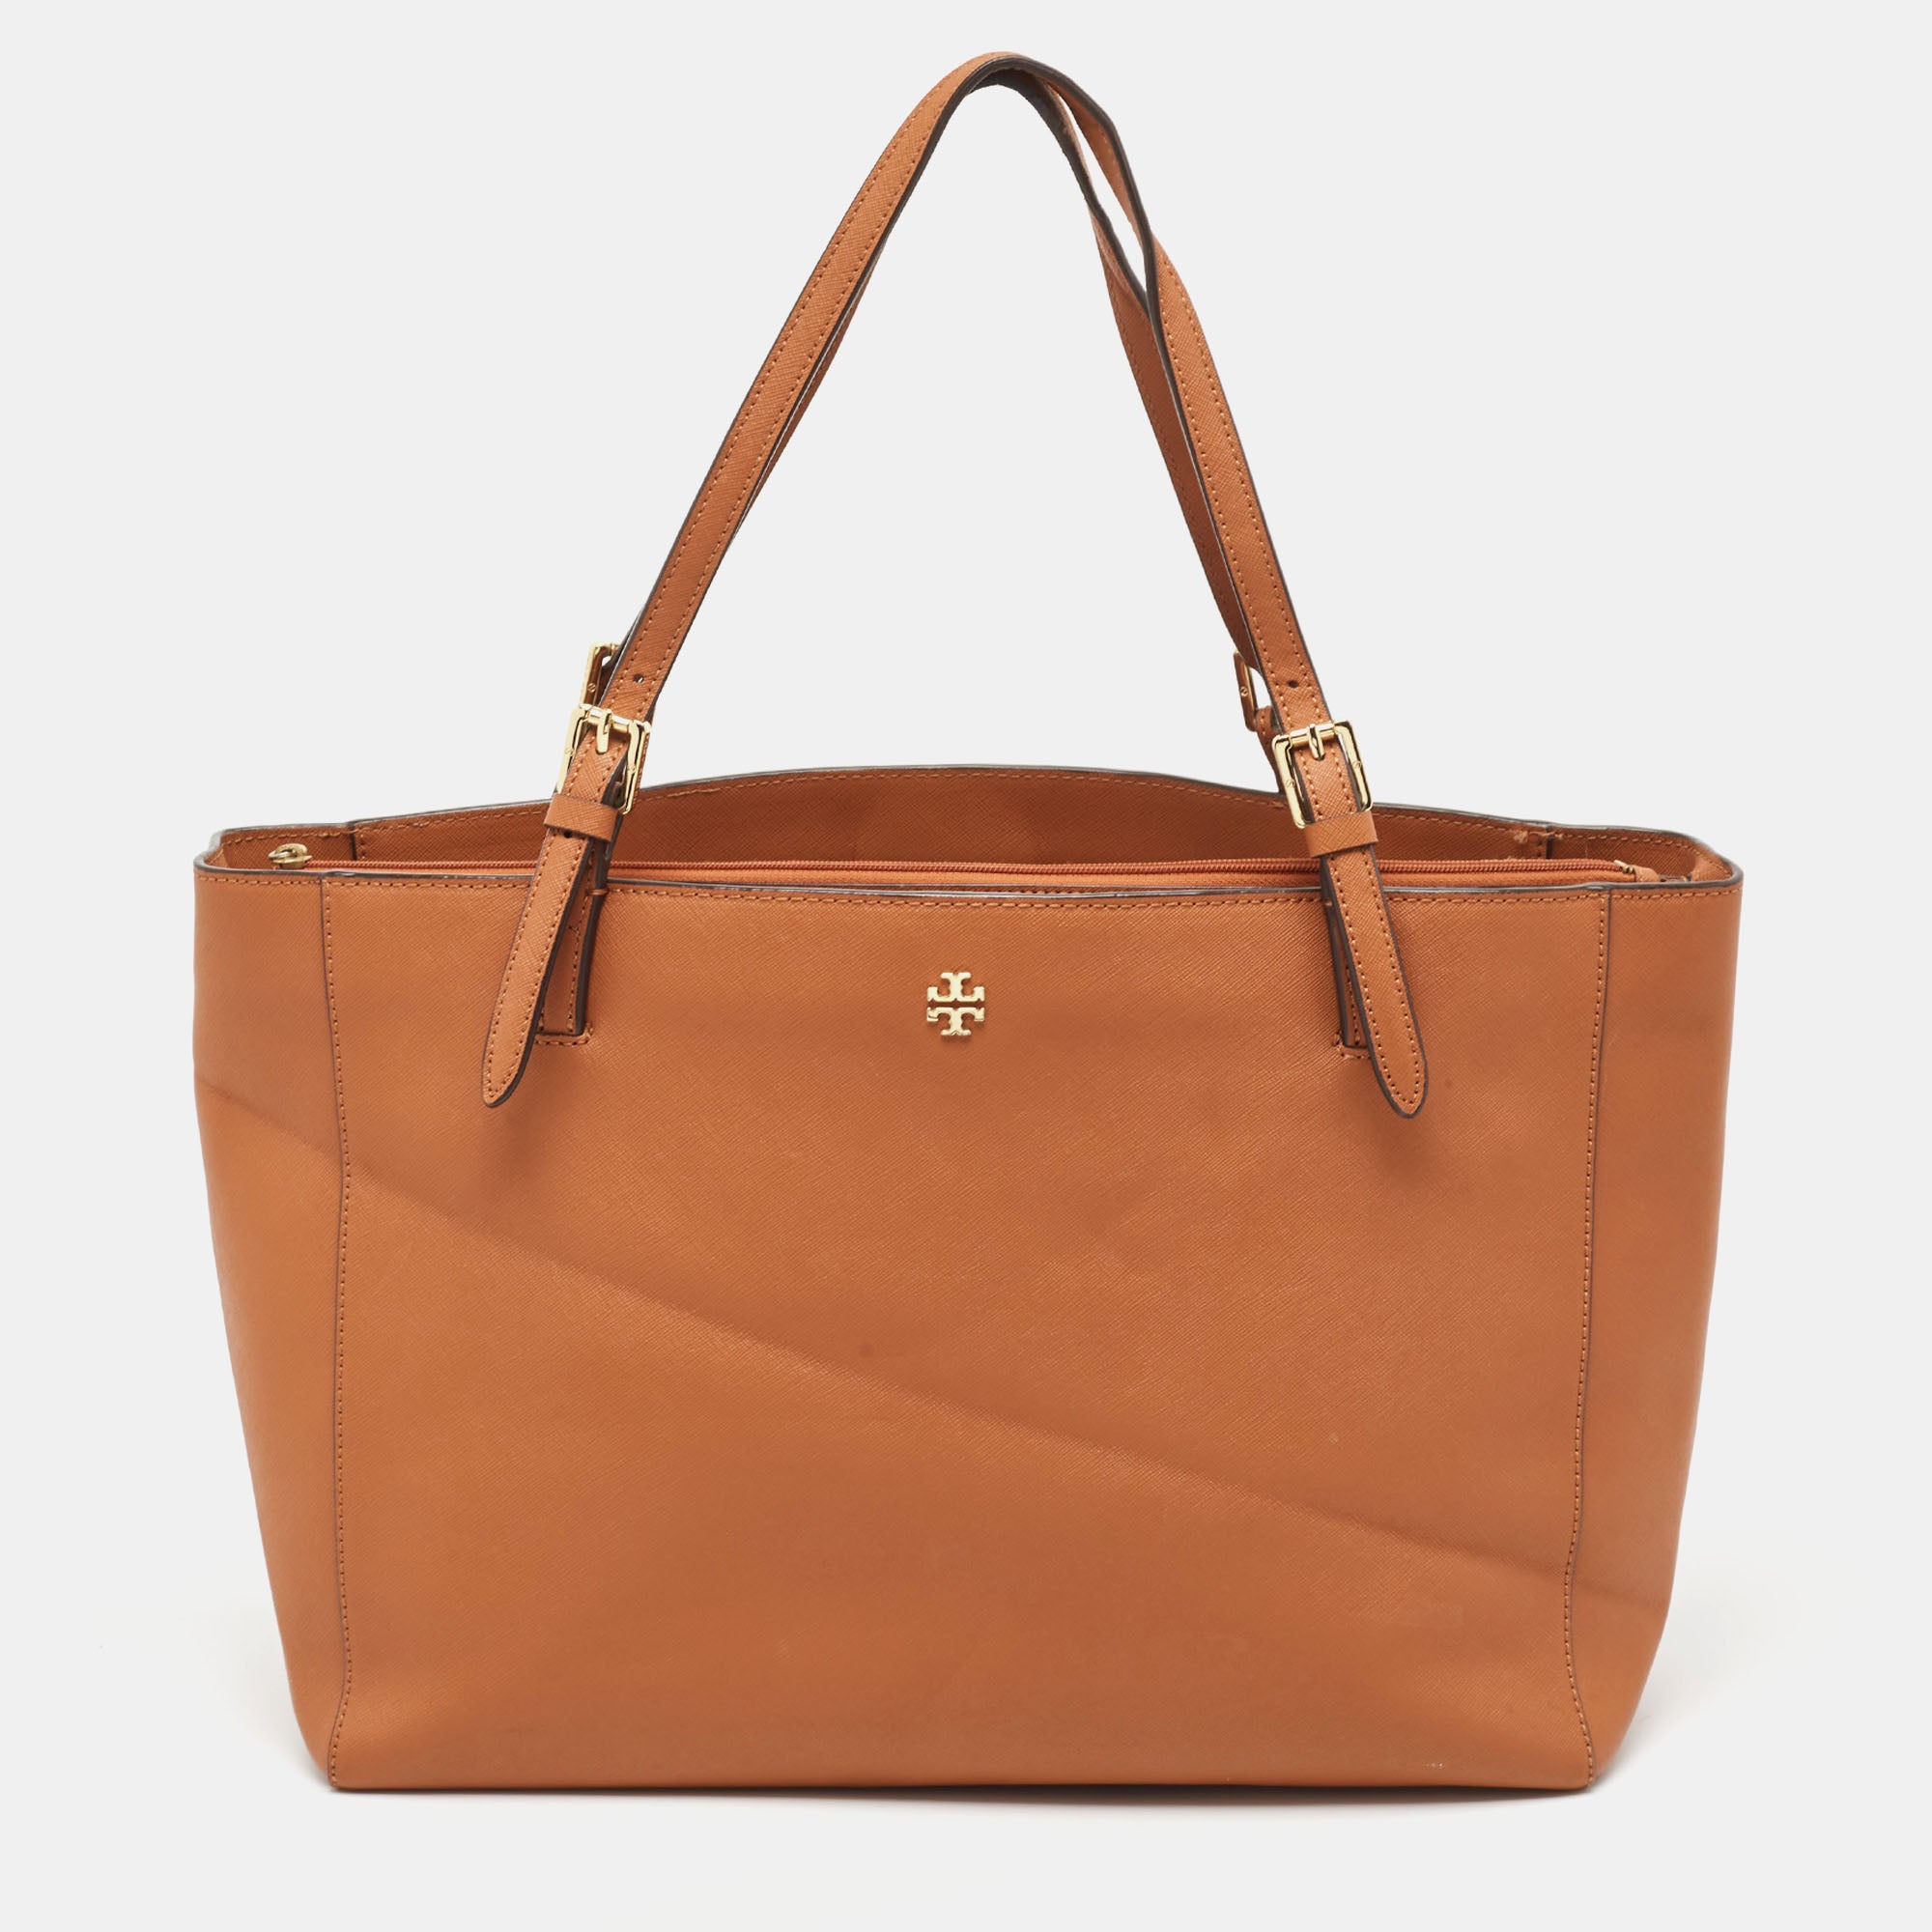 Brown leather double zip Tory Burch tote bag | Tory burch tote, Tory burch  bag totes, Tory burch